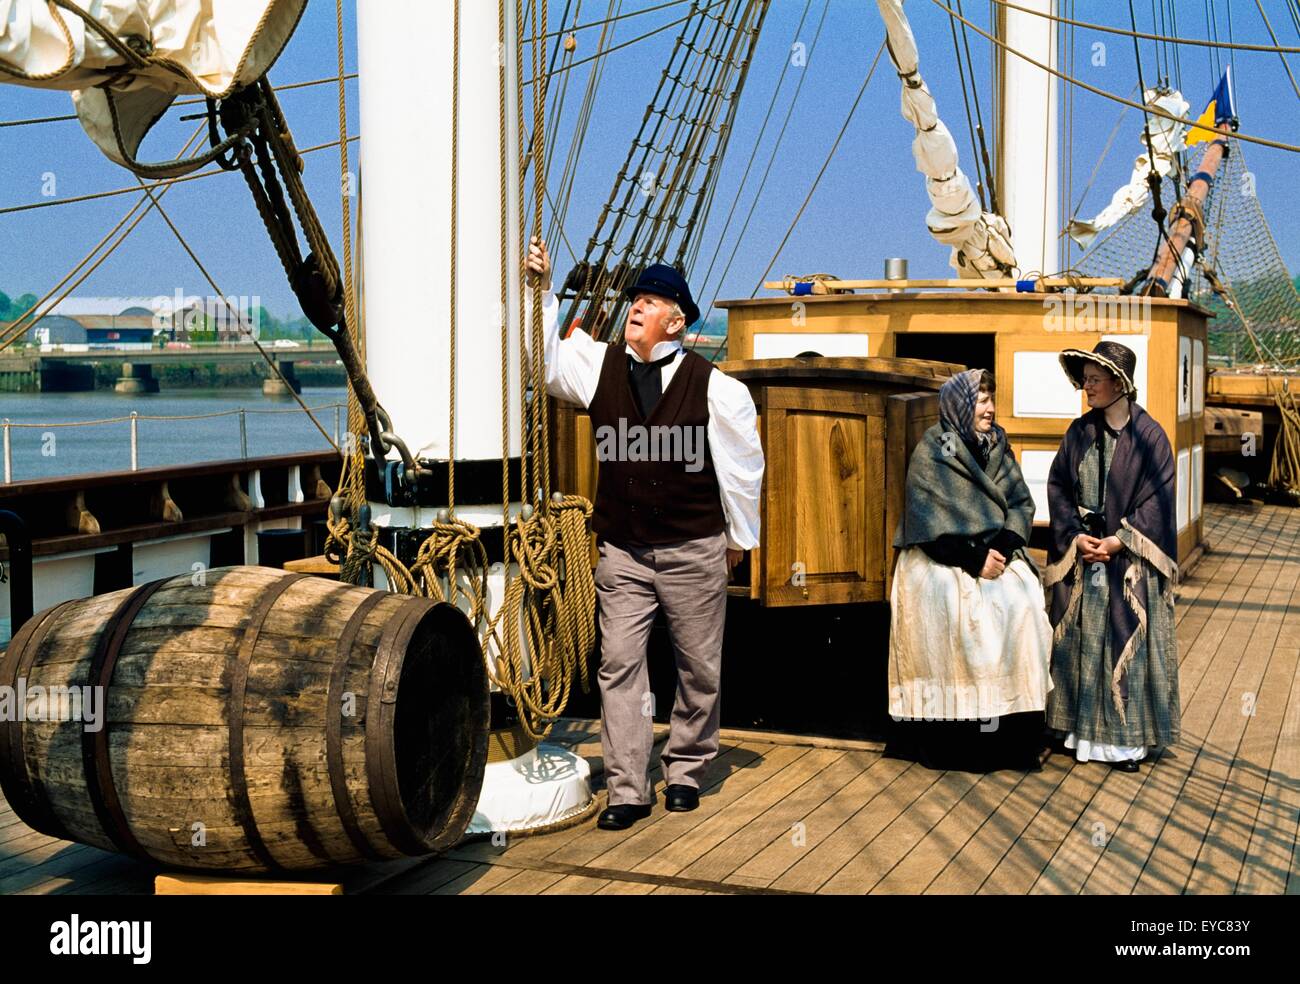 Dunbrody Famine Ship, New Ross, Co Wexford, Ireland; Actors Aboard A Replica Of A 19Th Century Famine Ship Stock Photo